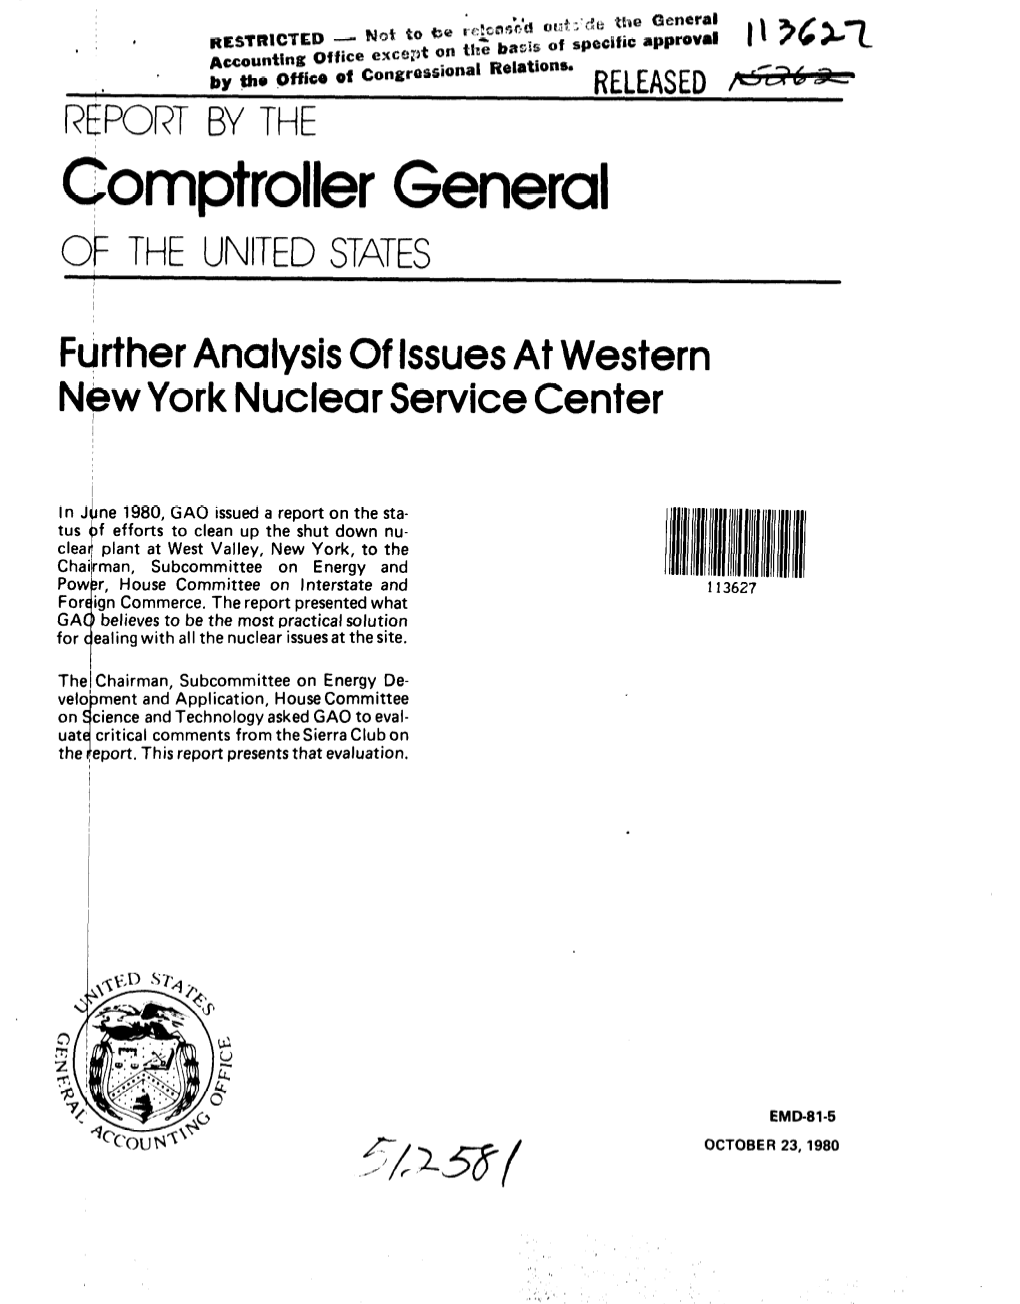 EMD-81-5 Further Analysis of Issues at Western New York Nuclear